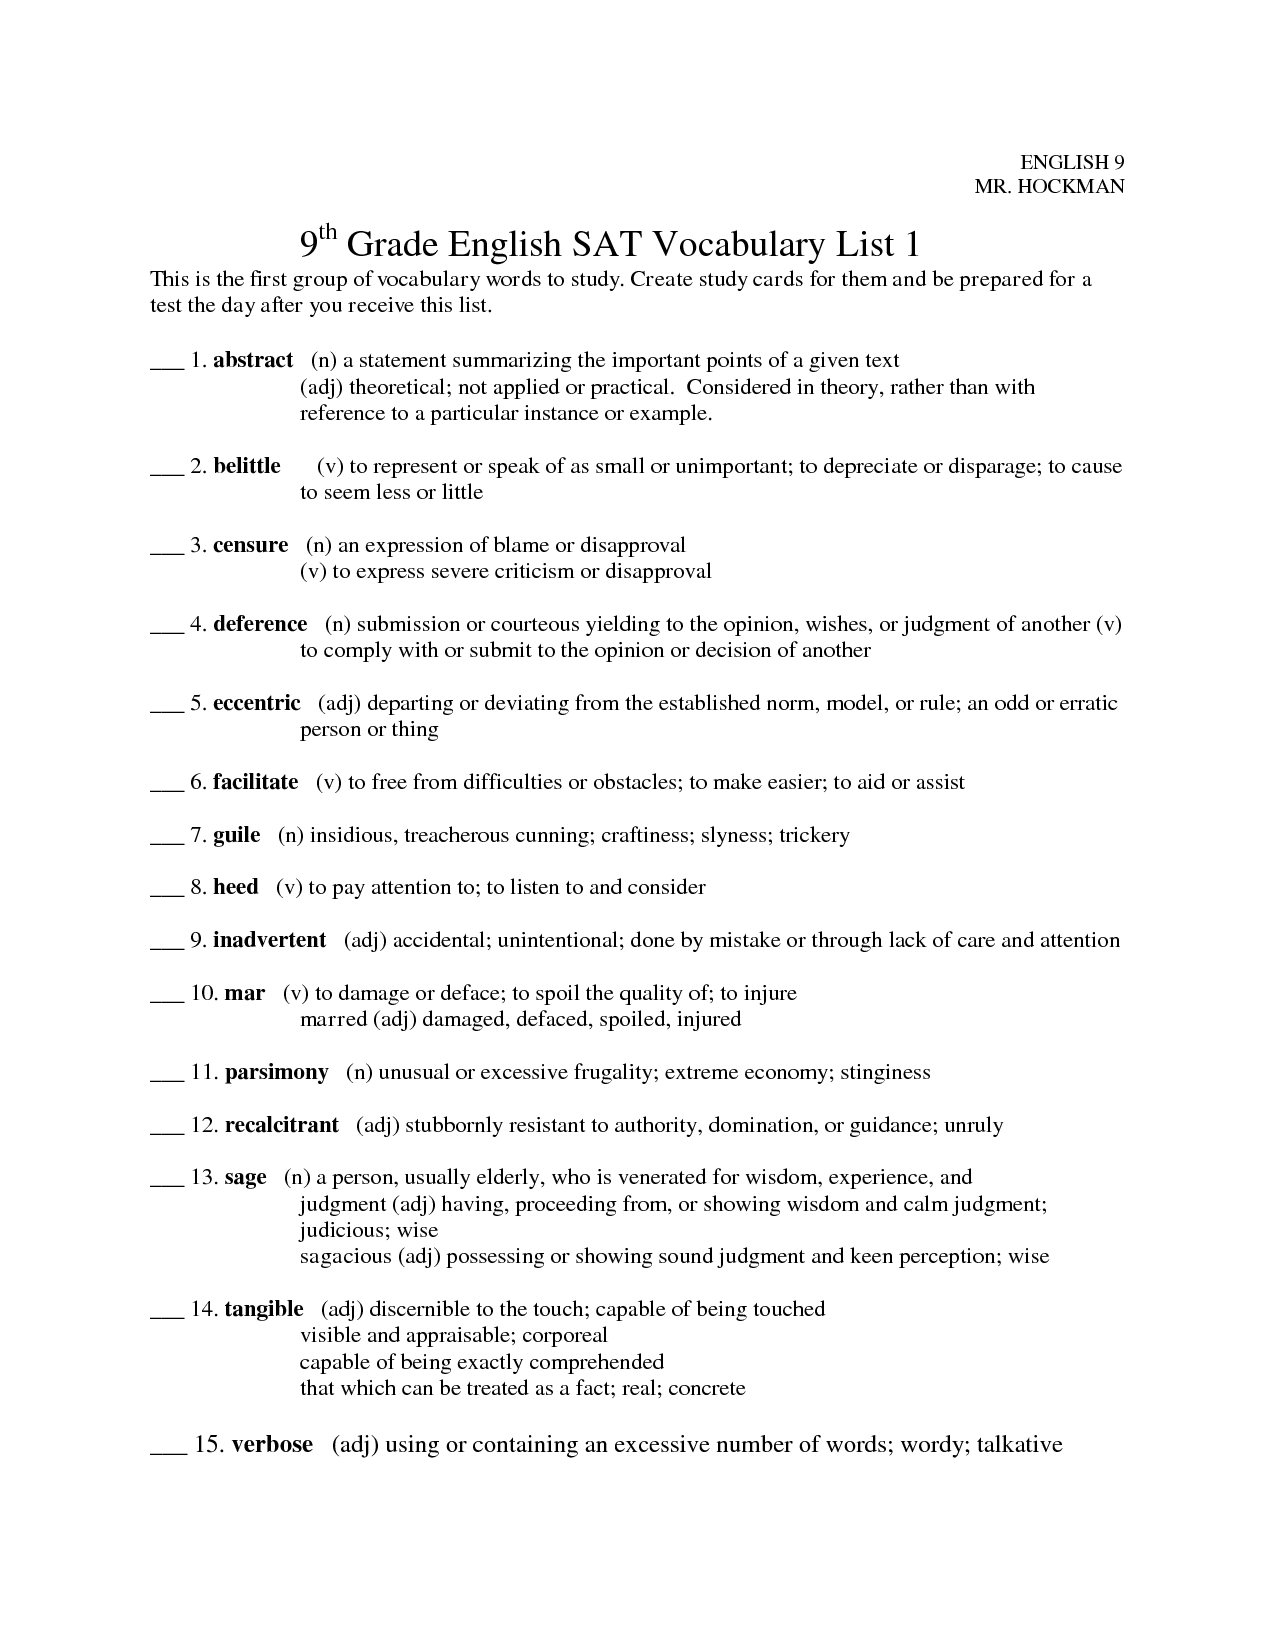 Free 9th Grade Vocabulary Worksheets Image